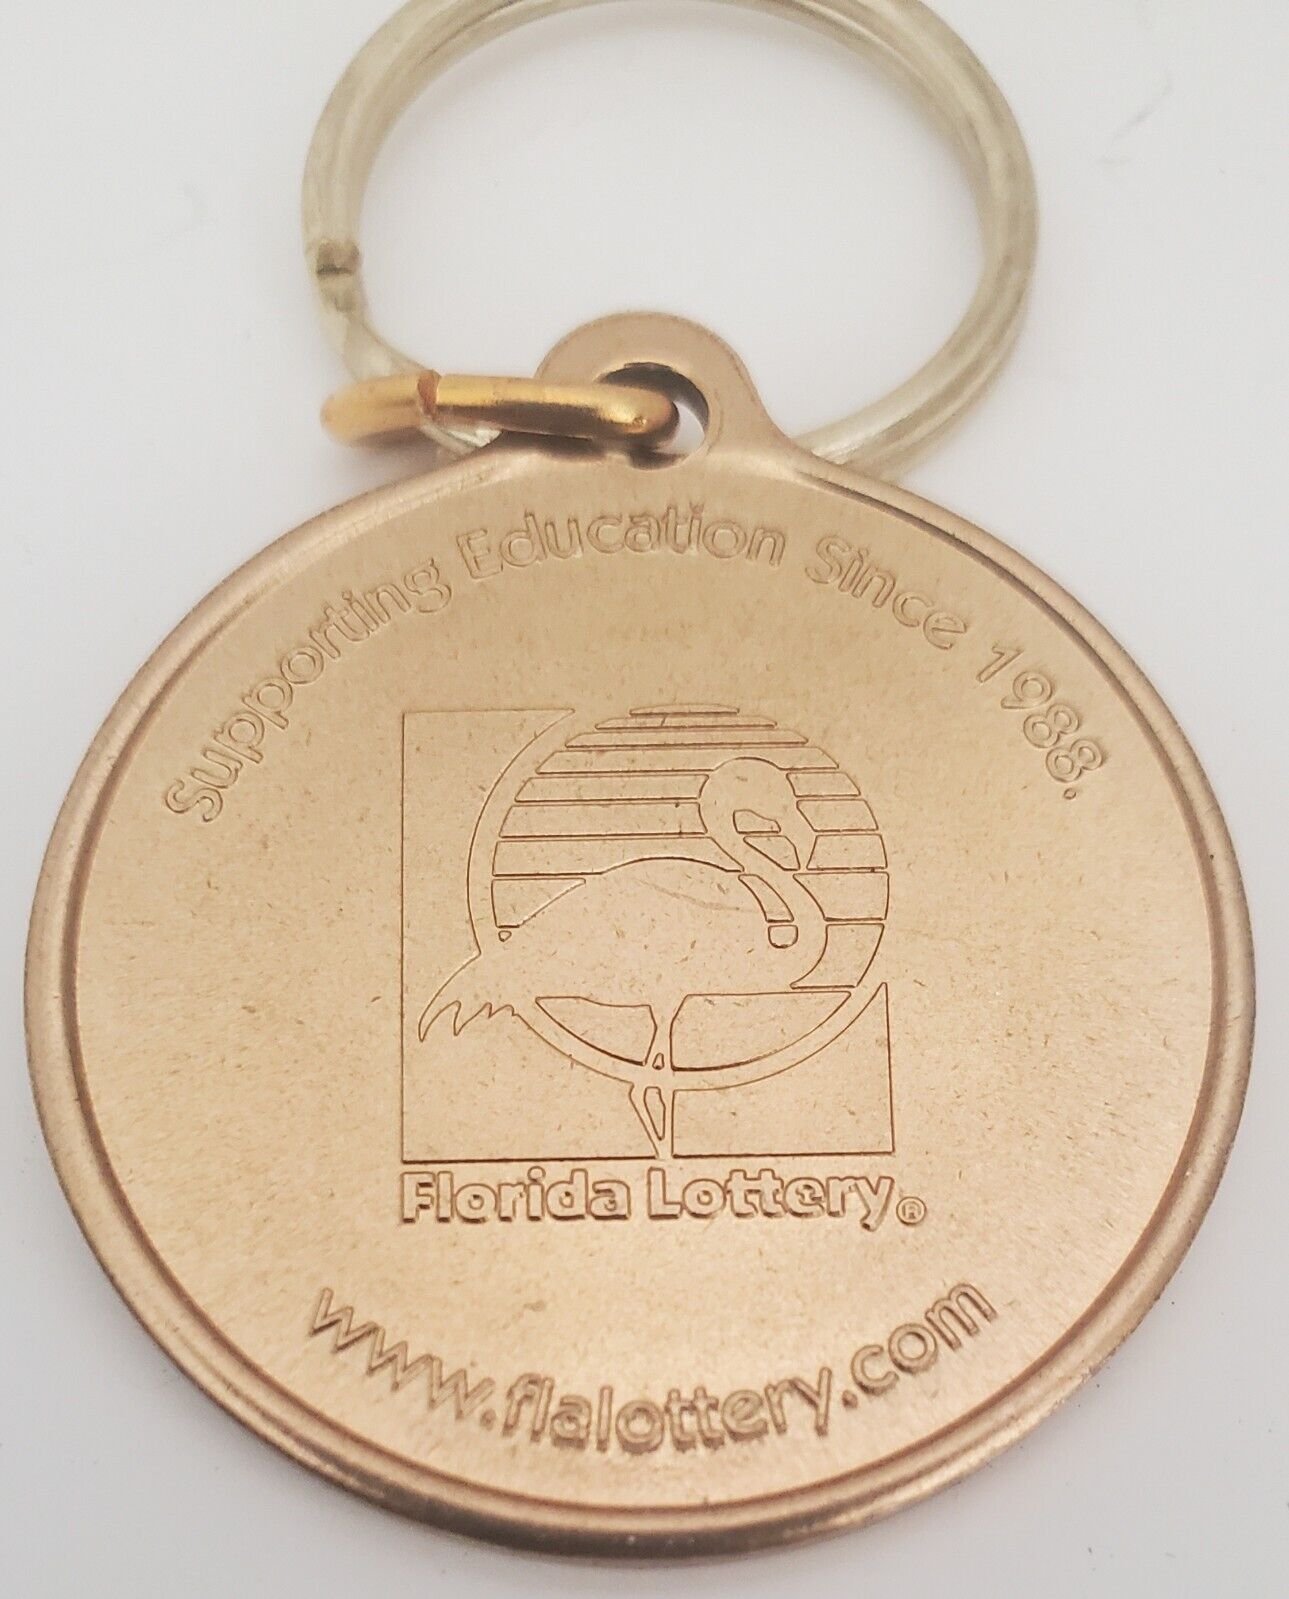 RARE Florida Lottery Key Ring SCRATCH OFF Gold Coin HTF NEW Stocking Stuffer